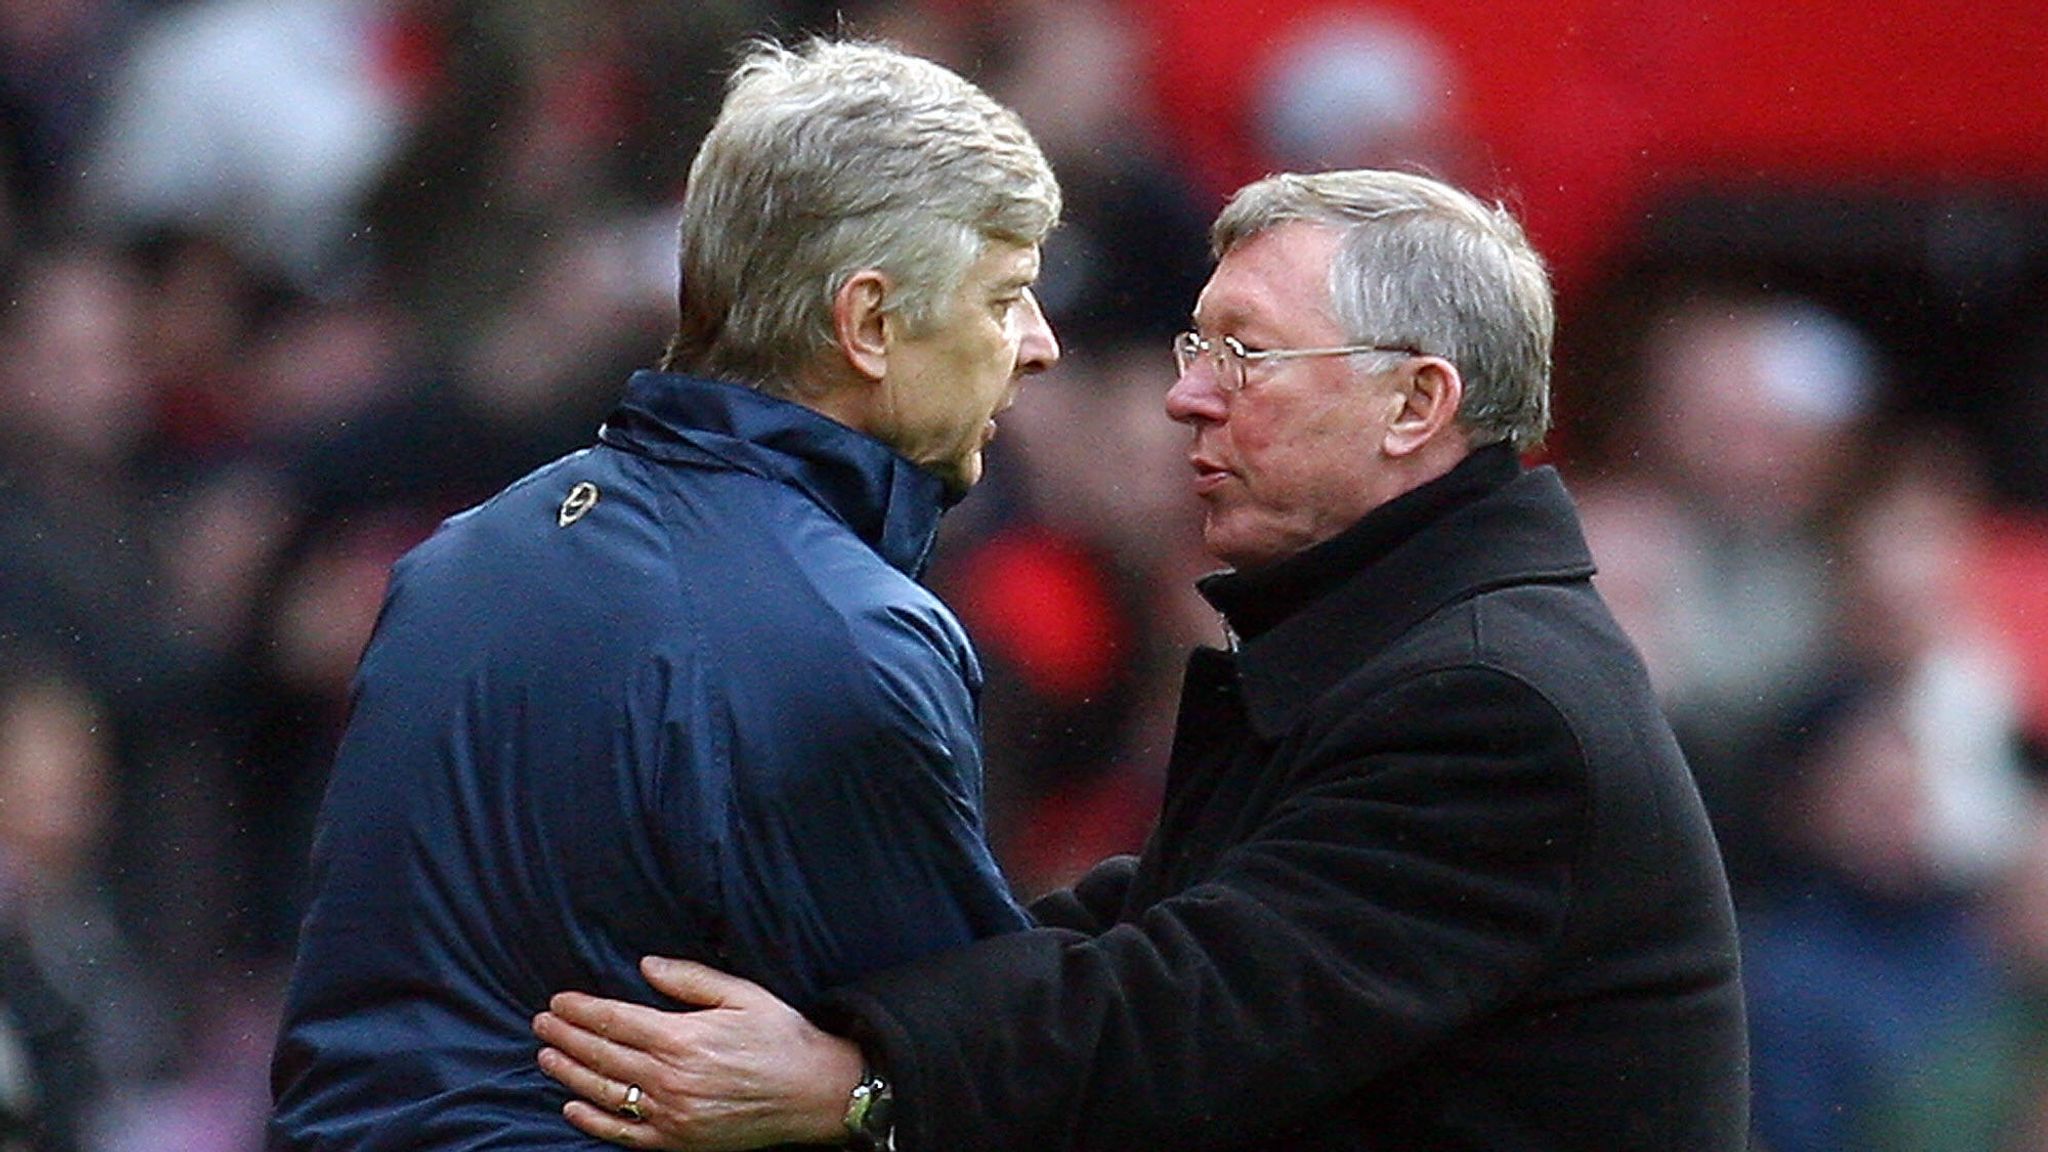 "They Are The Gods Of Football  They Deserved It" - This Is How Fans Reacted As Arsene Wenger And Sir Alex Ferguson Became The First Managers To Be Inducted In The English Premier League Hall Of Fame